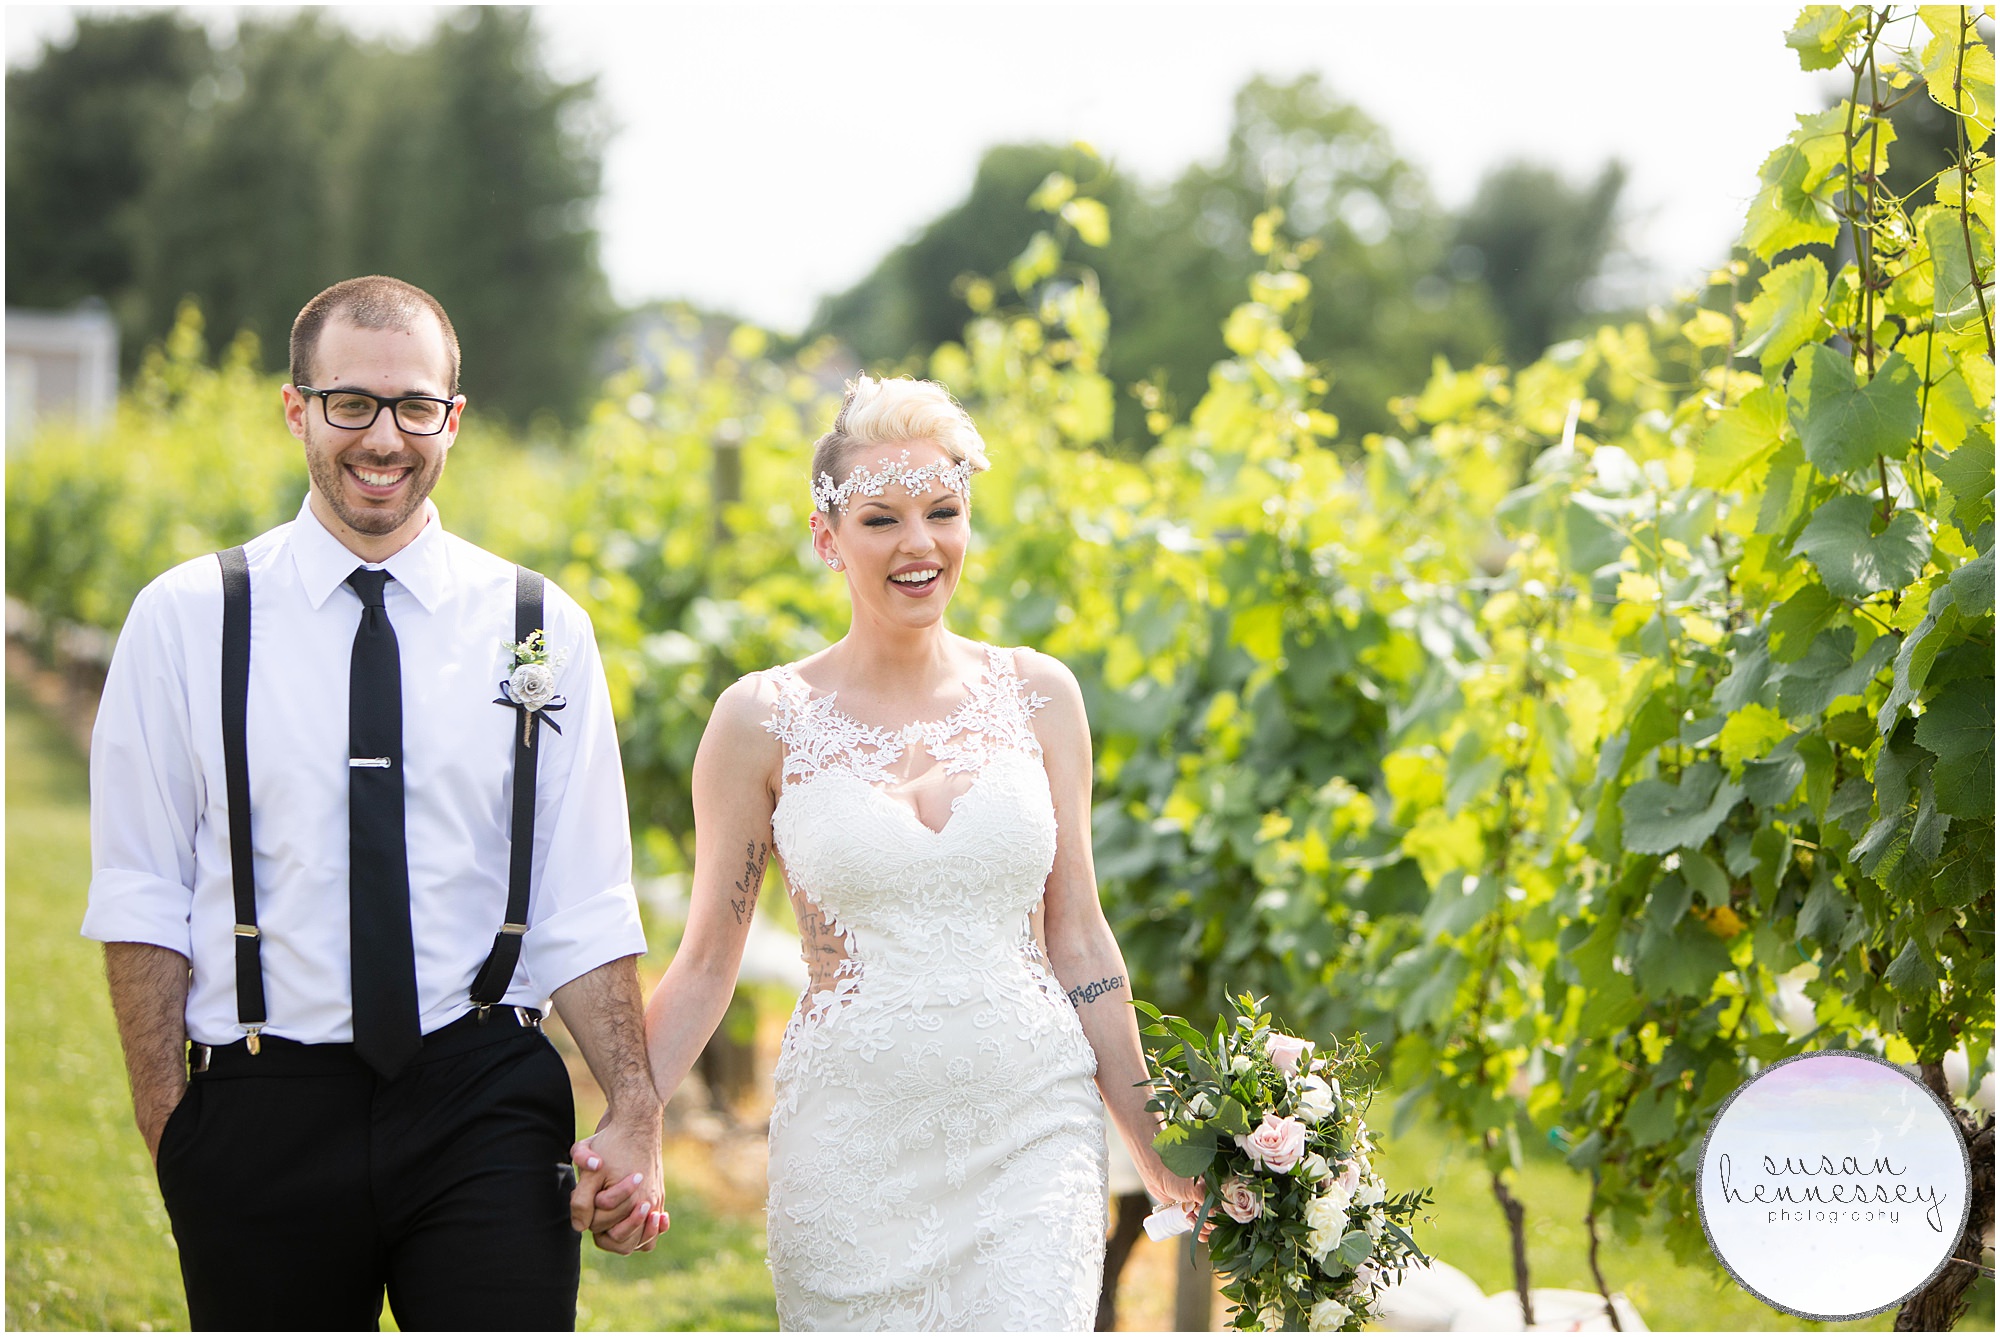 A music themed wedding at Tomasello Winery